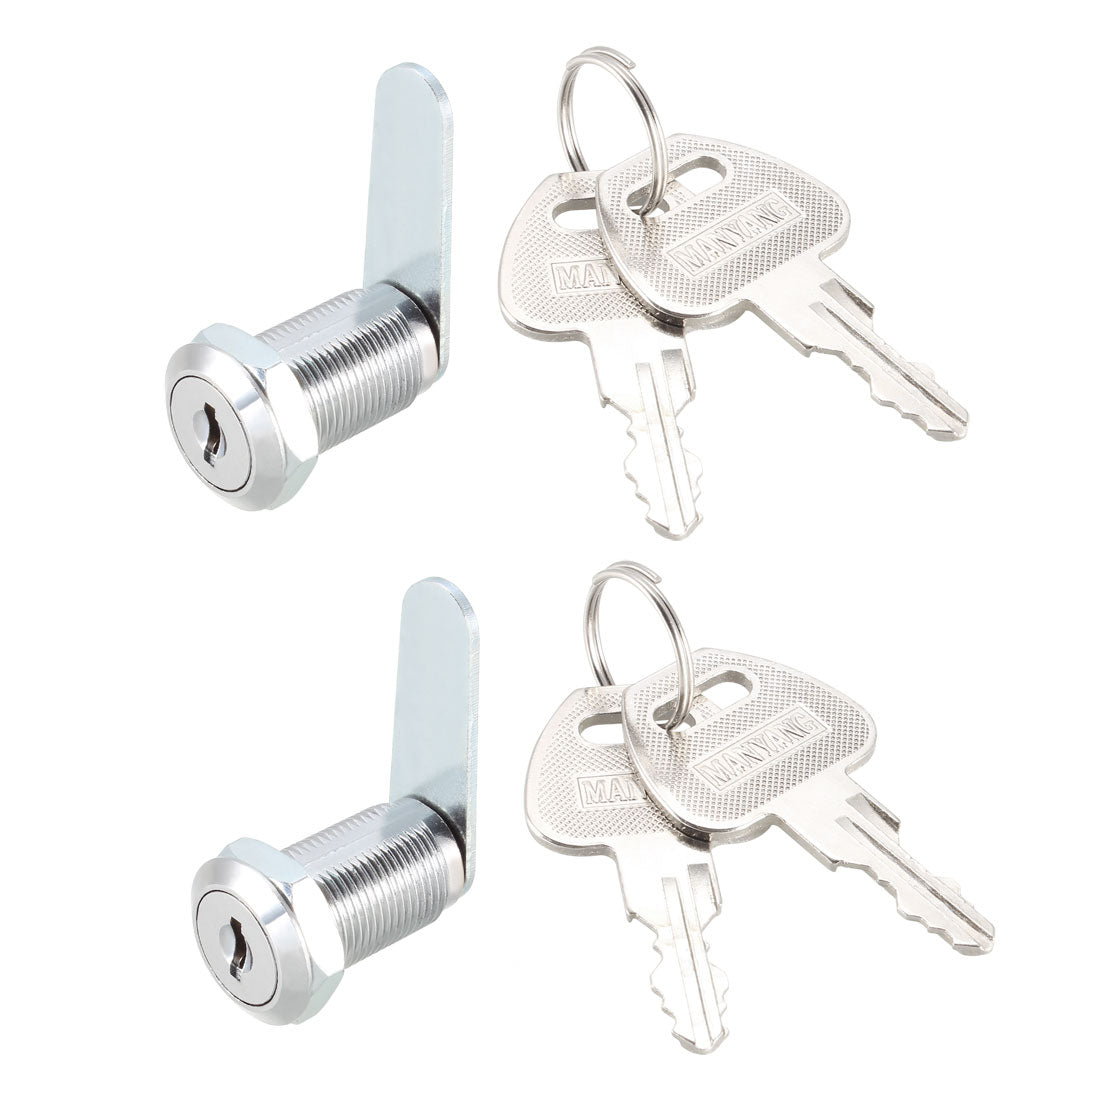 uxcell Uxcell Cam Locks 30mm Cylinder Length Fits Max 7/8-inch Panel Keyed Different 2Pcs